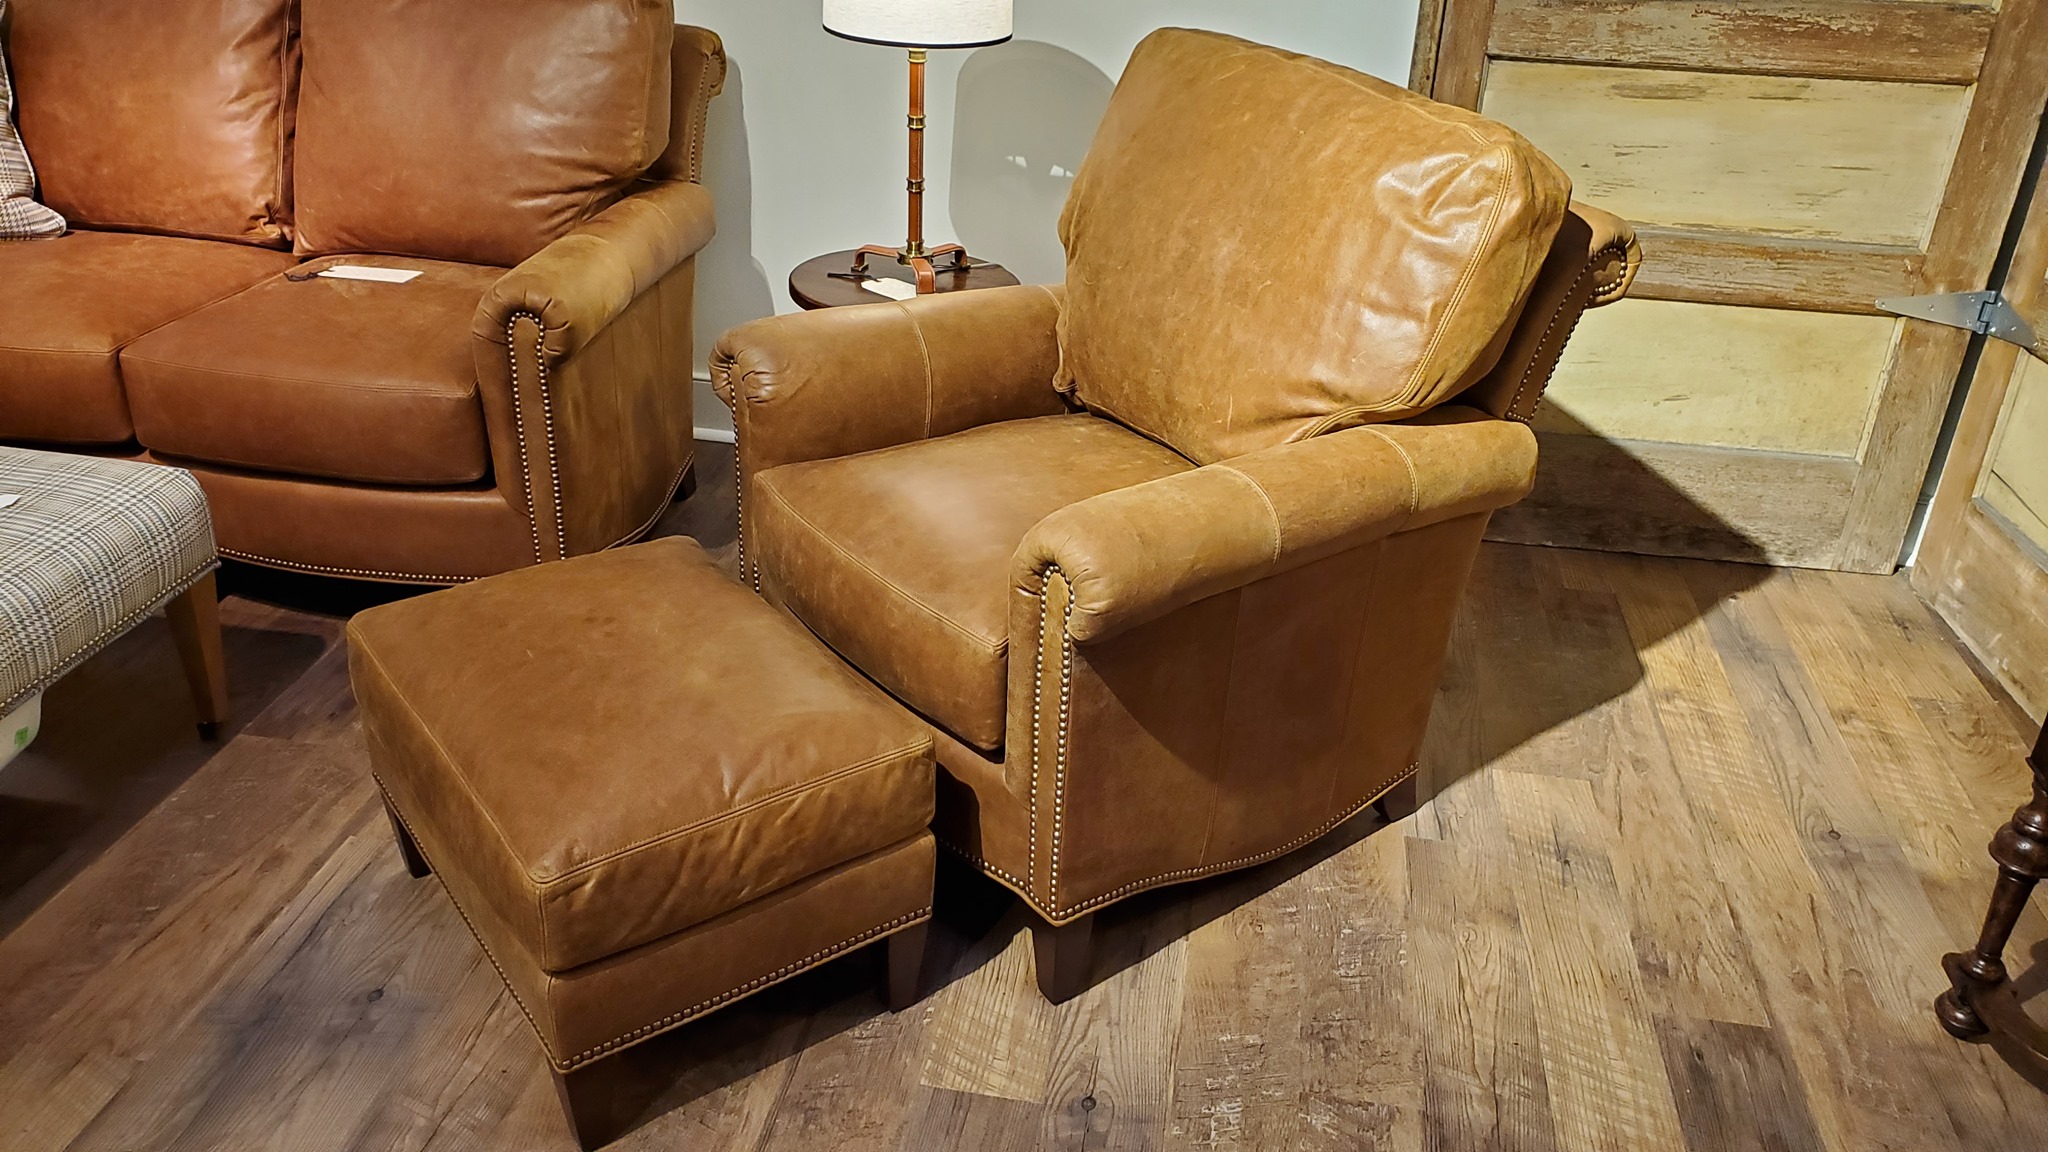 Living Room The Country Squire Furniture, Rustic Leather Chair And Ottoman